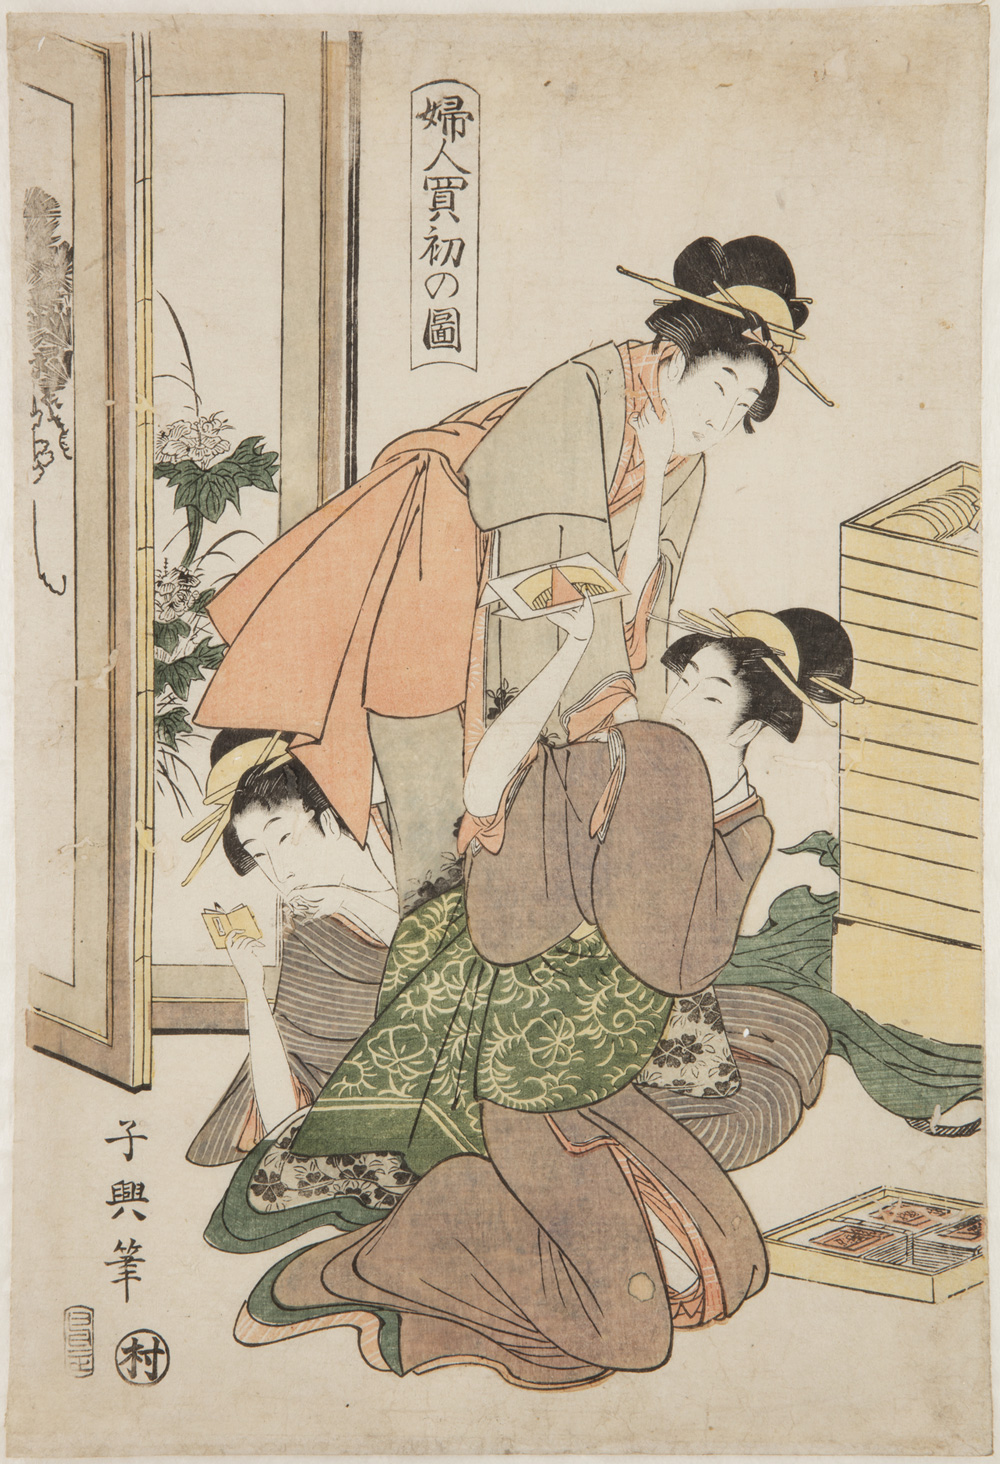 Japanese print of a group of women dressed in traditional clothes, one standing and the others kneeling around her.